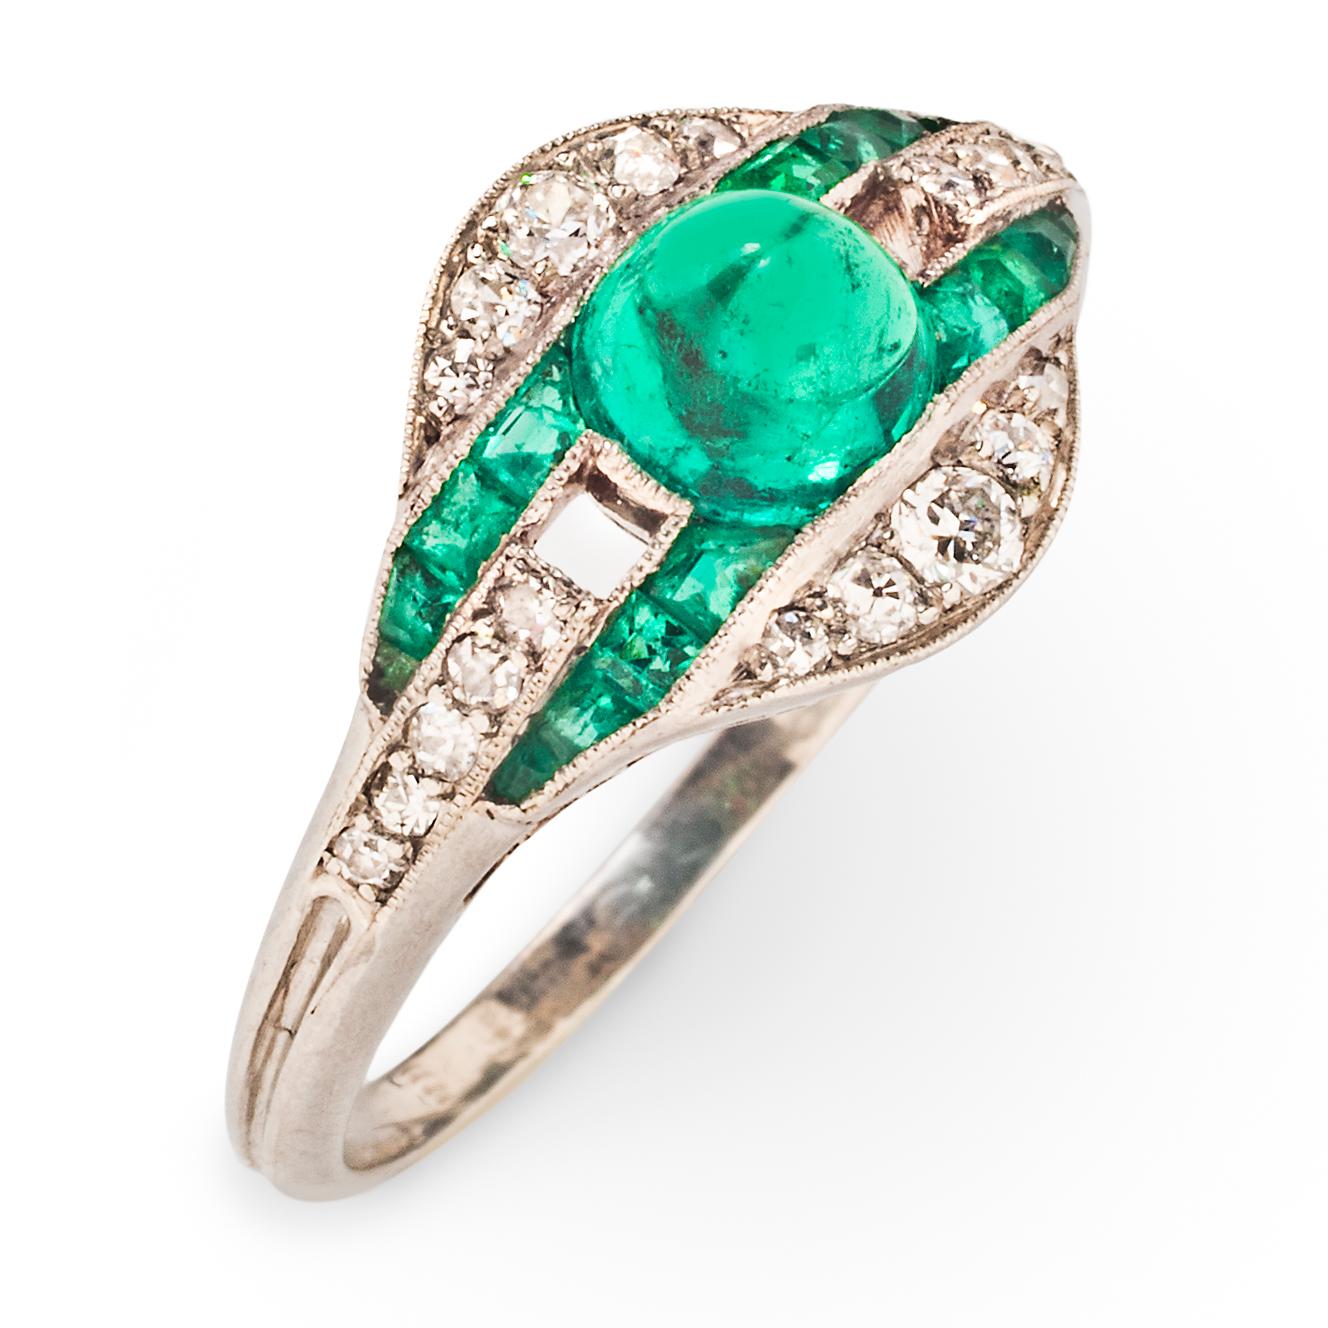 This delicate Art Deco ring features a vibrant Columbian cabochon emerald in a platinum openwork mount set with diamonds and emeralds.  The central stone is positioned between two parallel lines of calibre-cut channel set emeralds separated by